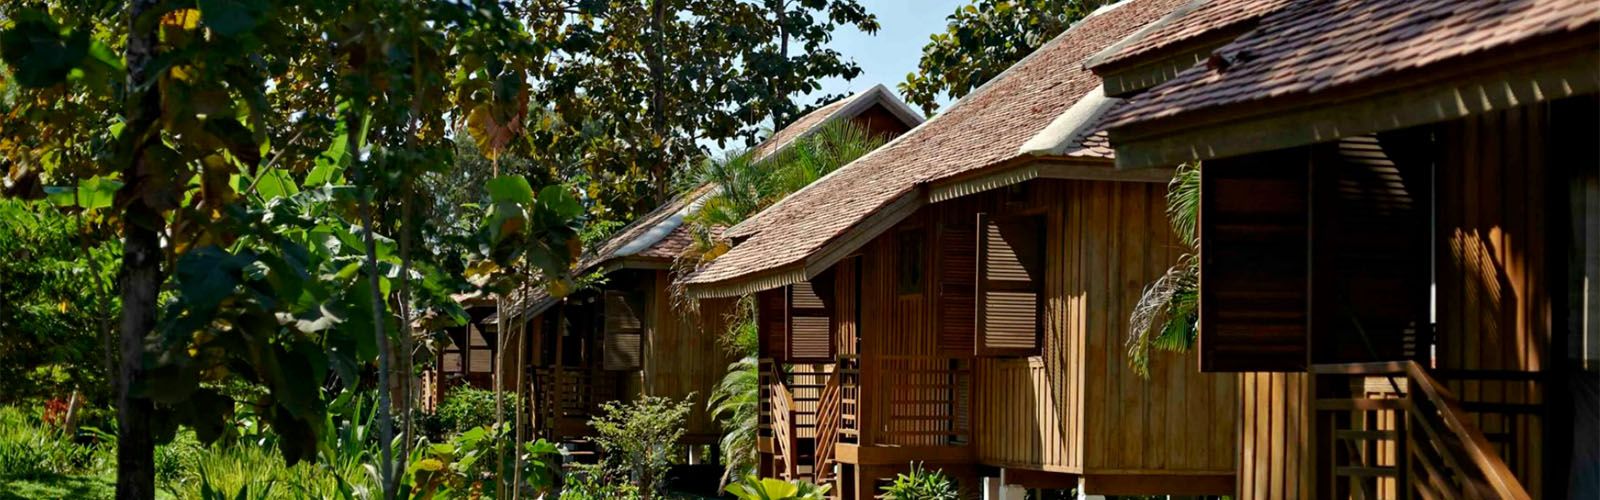 Stay In Lush At  Eco Lodge In Laos | Blogs | Asianventure Tours